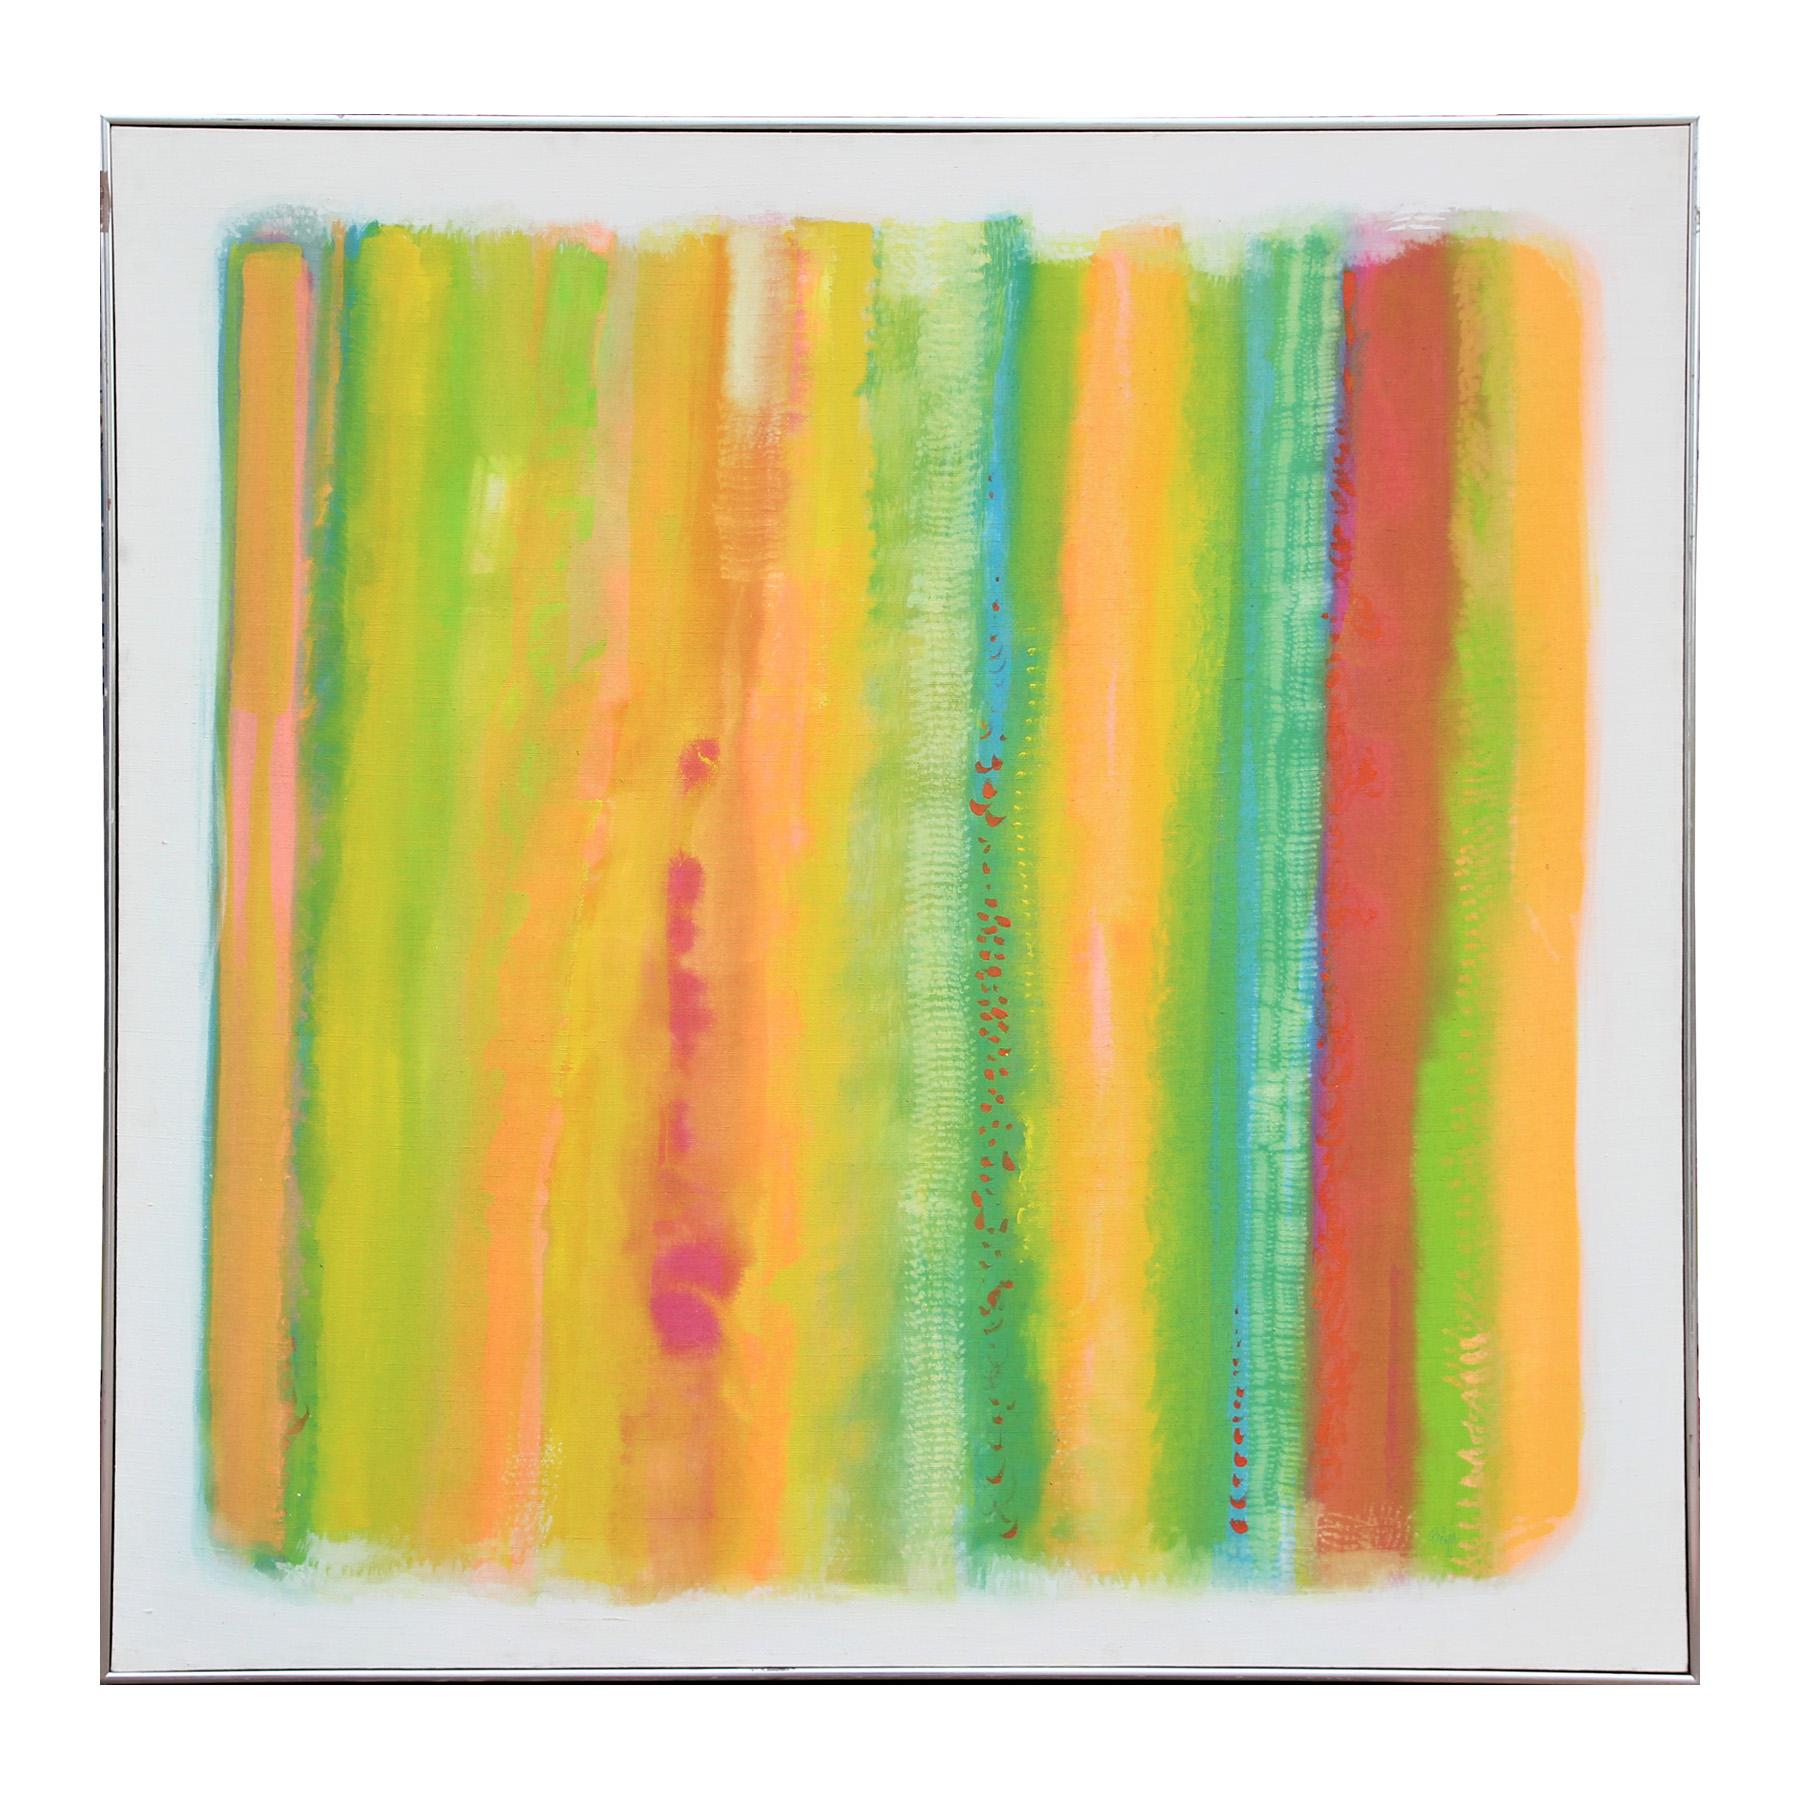 Lamar Briggs Landscape Painting - Large Modern Colorful Bright Yellow, Blue, Green, and Orange Abstract Painting